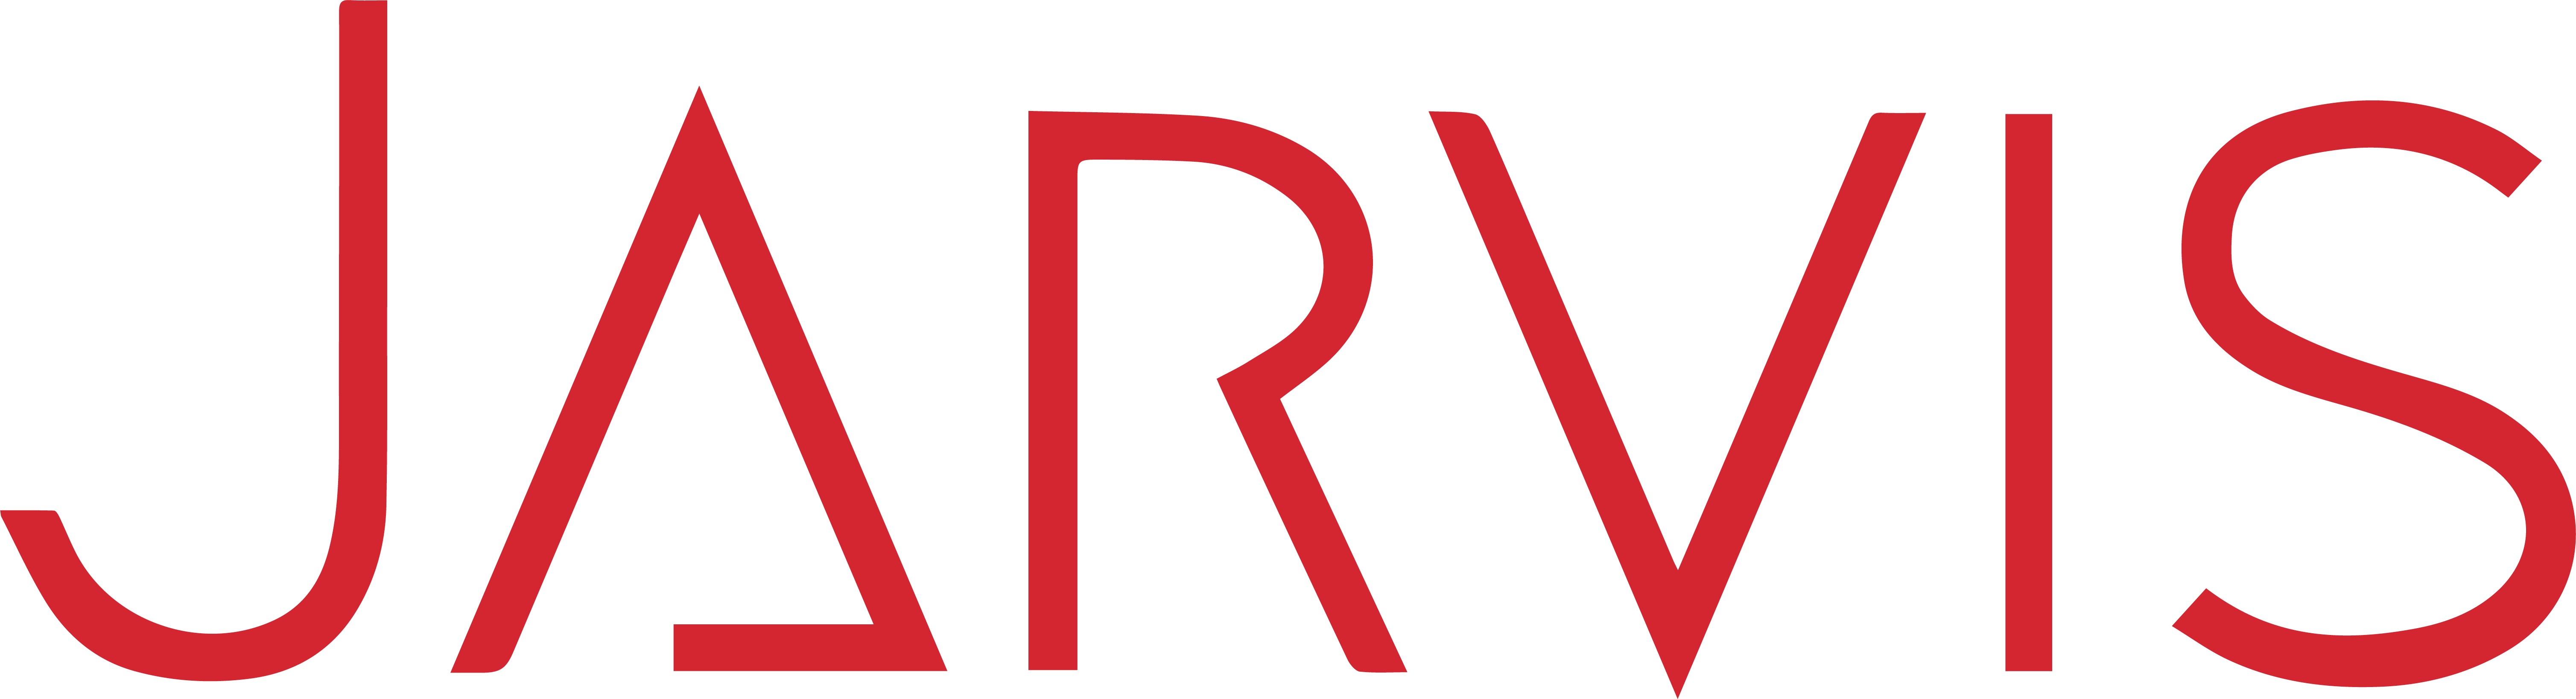 Seanei Gibbons - jarvis-logo-red-highres